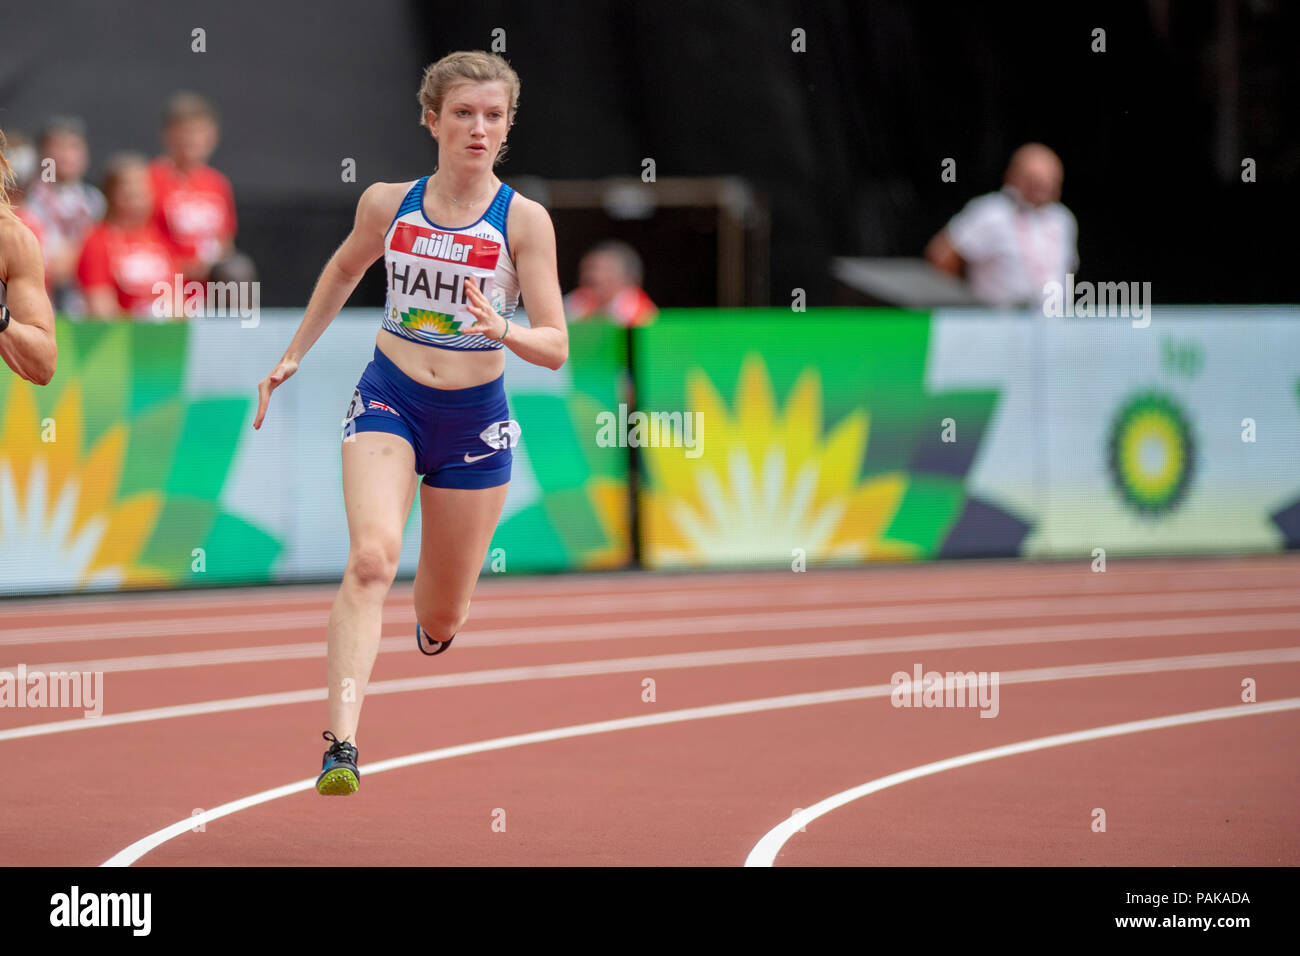 London, UK. 22nd July 2018. Sophie Hahn (GBR) set a new World Record (25.93 seconds) in the women's T37/38 200 metres at the Muller Anniversary Games at the London Stadium, London, Great Britiain, on 22 July 2018. Credit: Andrew Peat/Alamy Live News Stock Photo